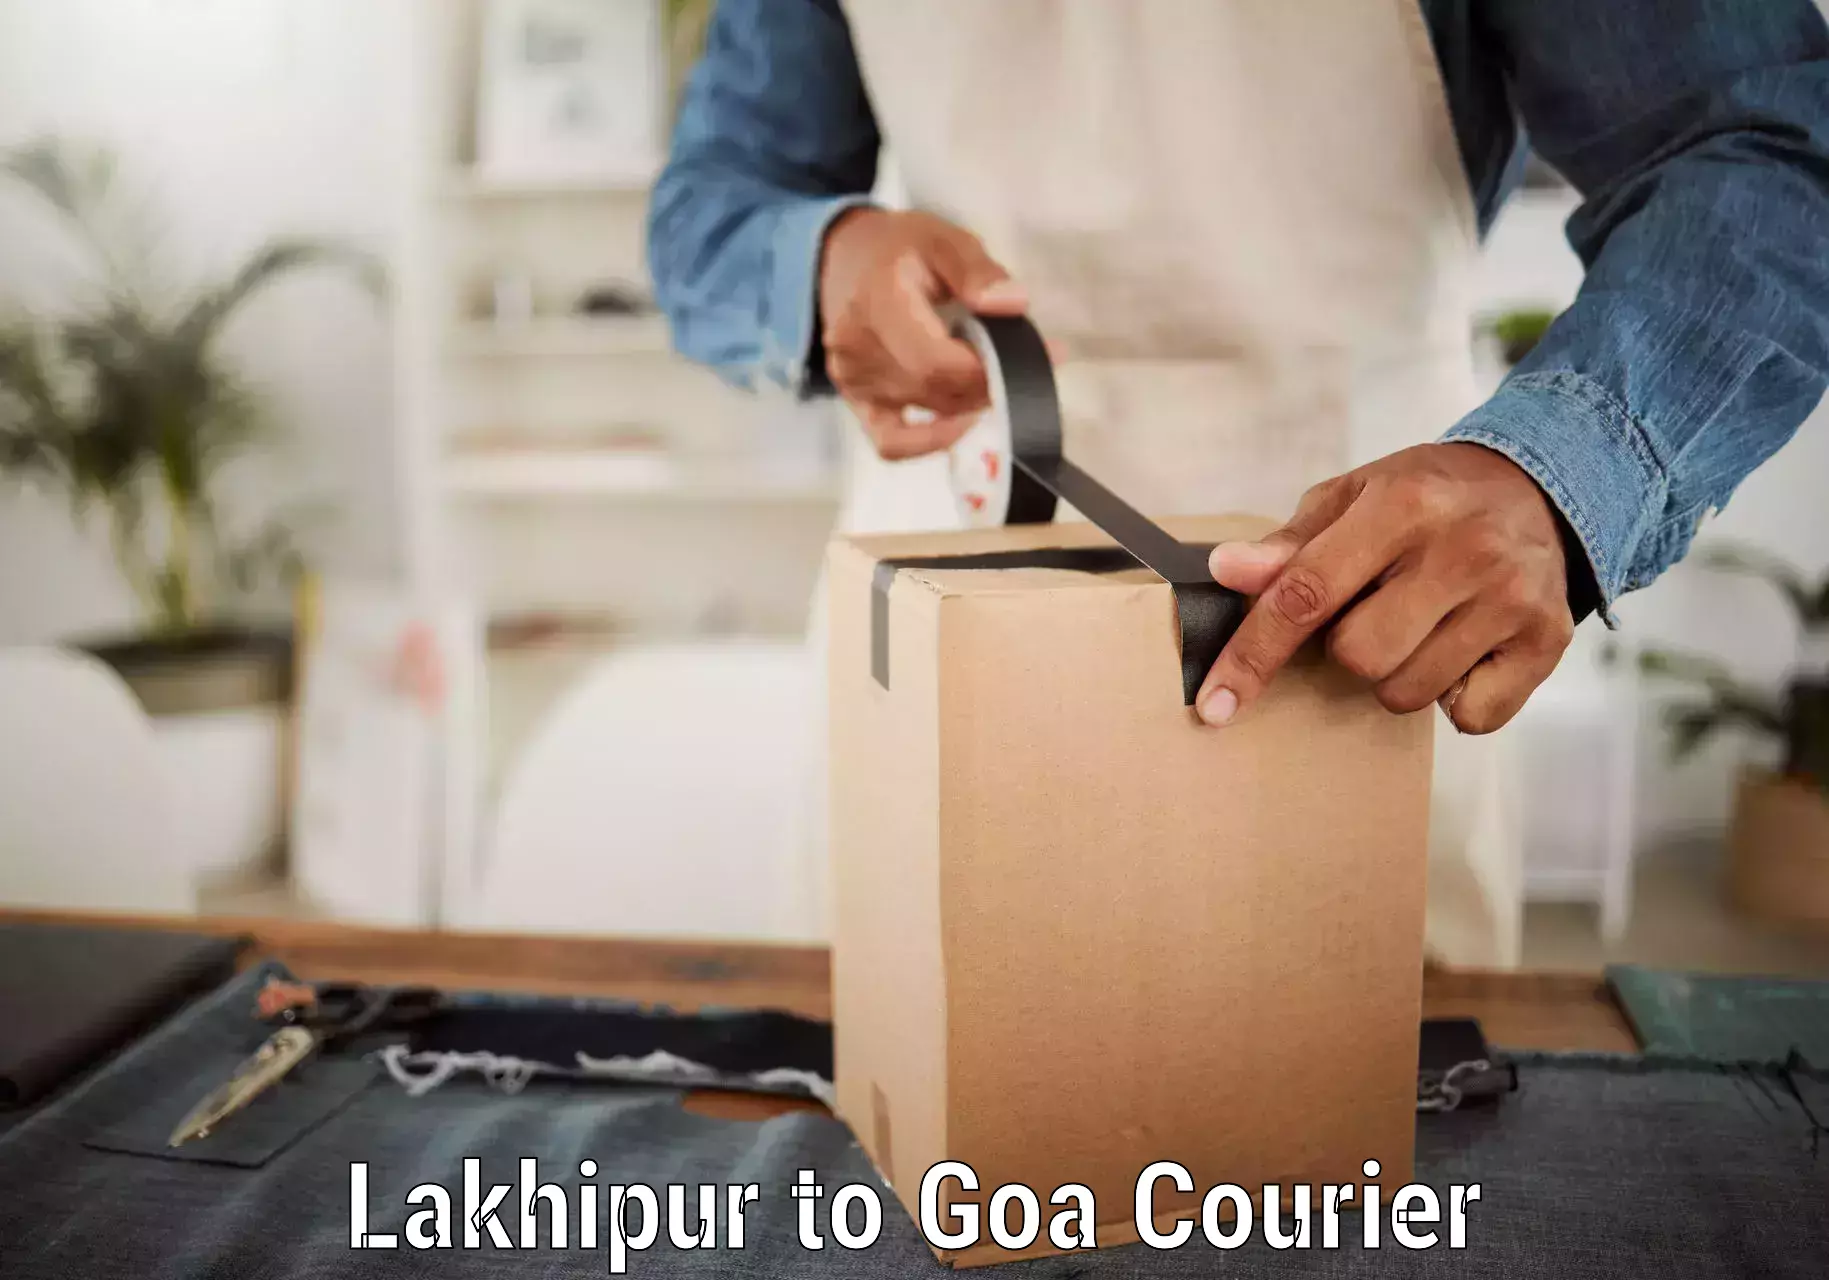 Same-day delivery solutions Lakhipur to Goa